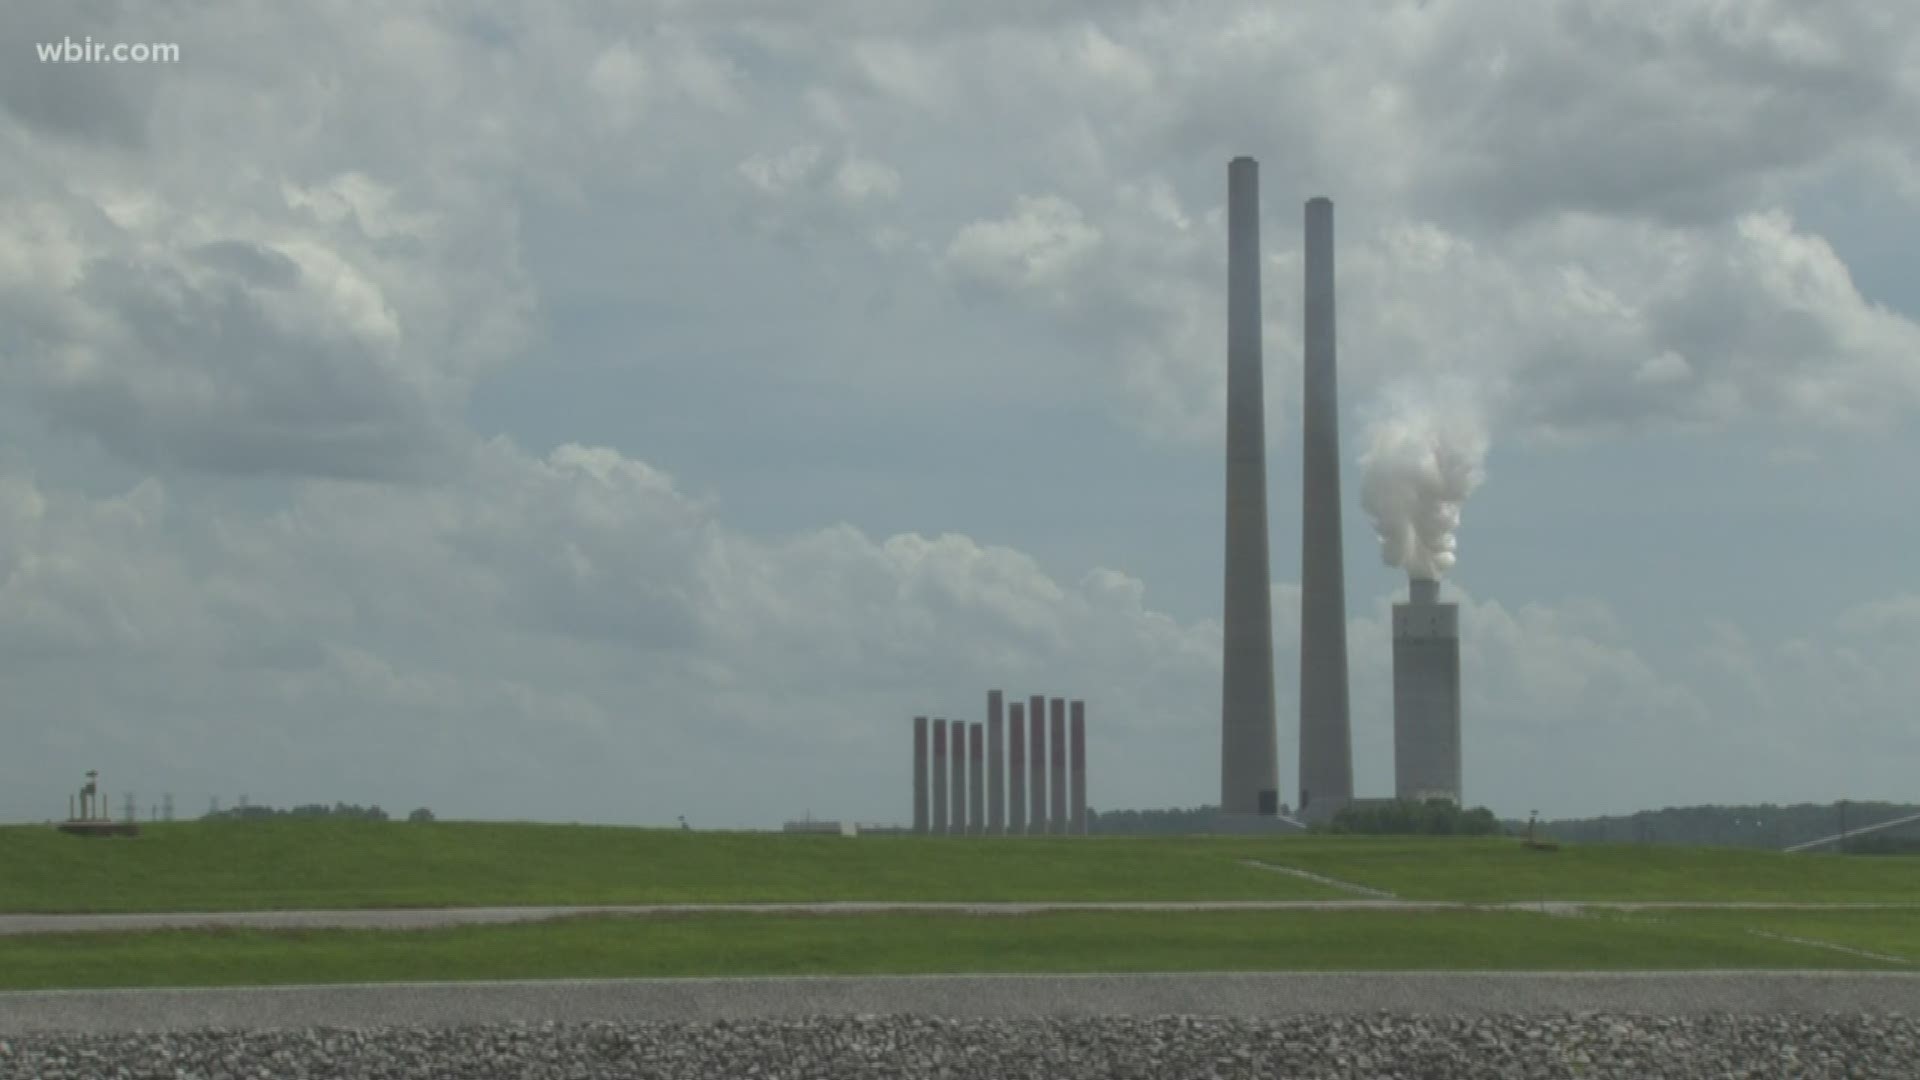 The action alleges TVA engaged in a cover-up over concerns about the dangers of coal ash.